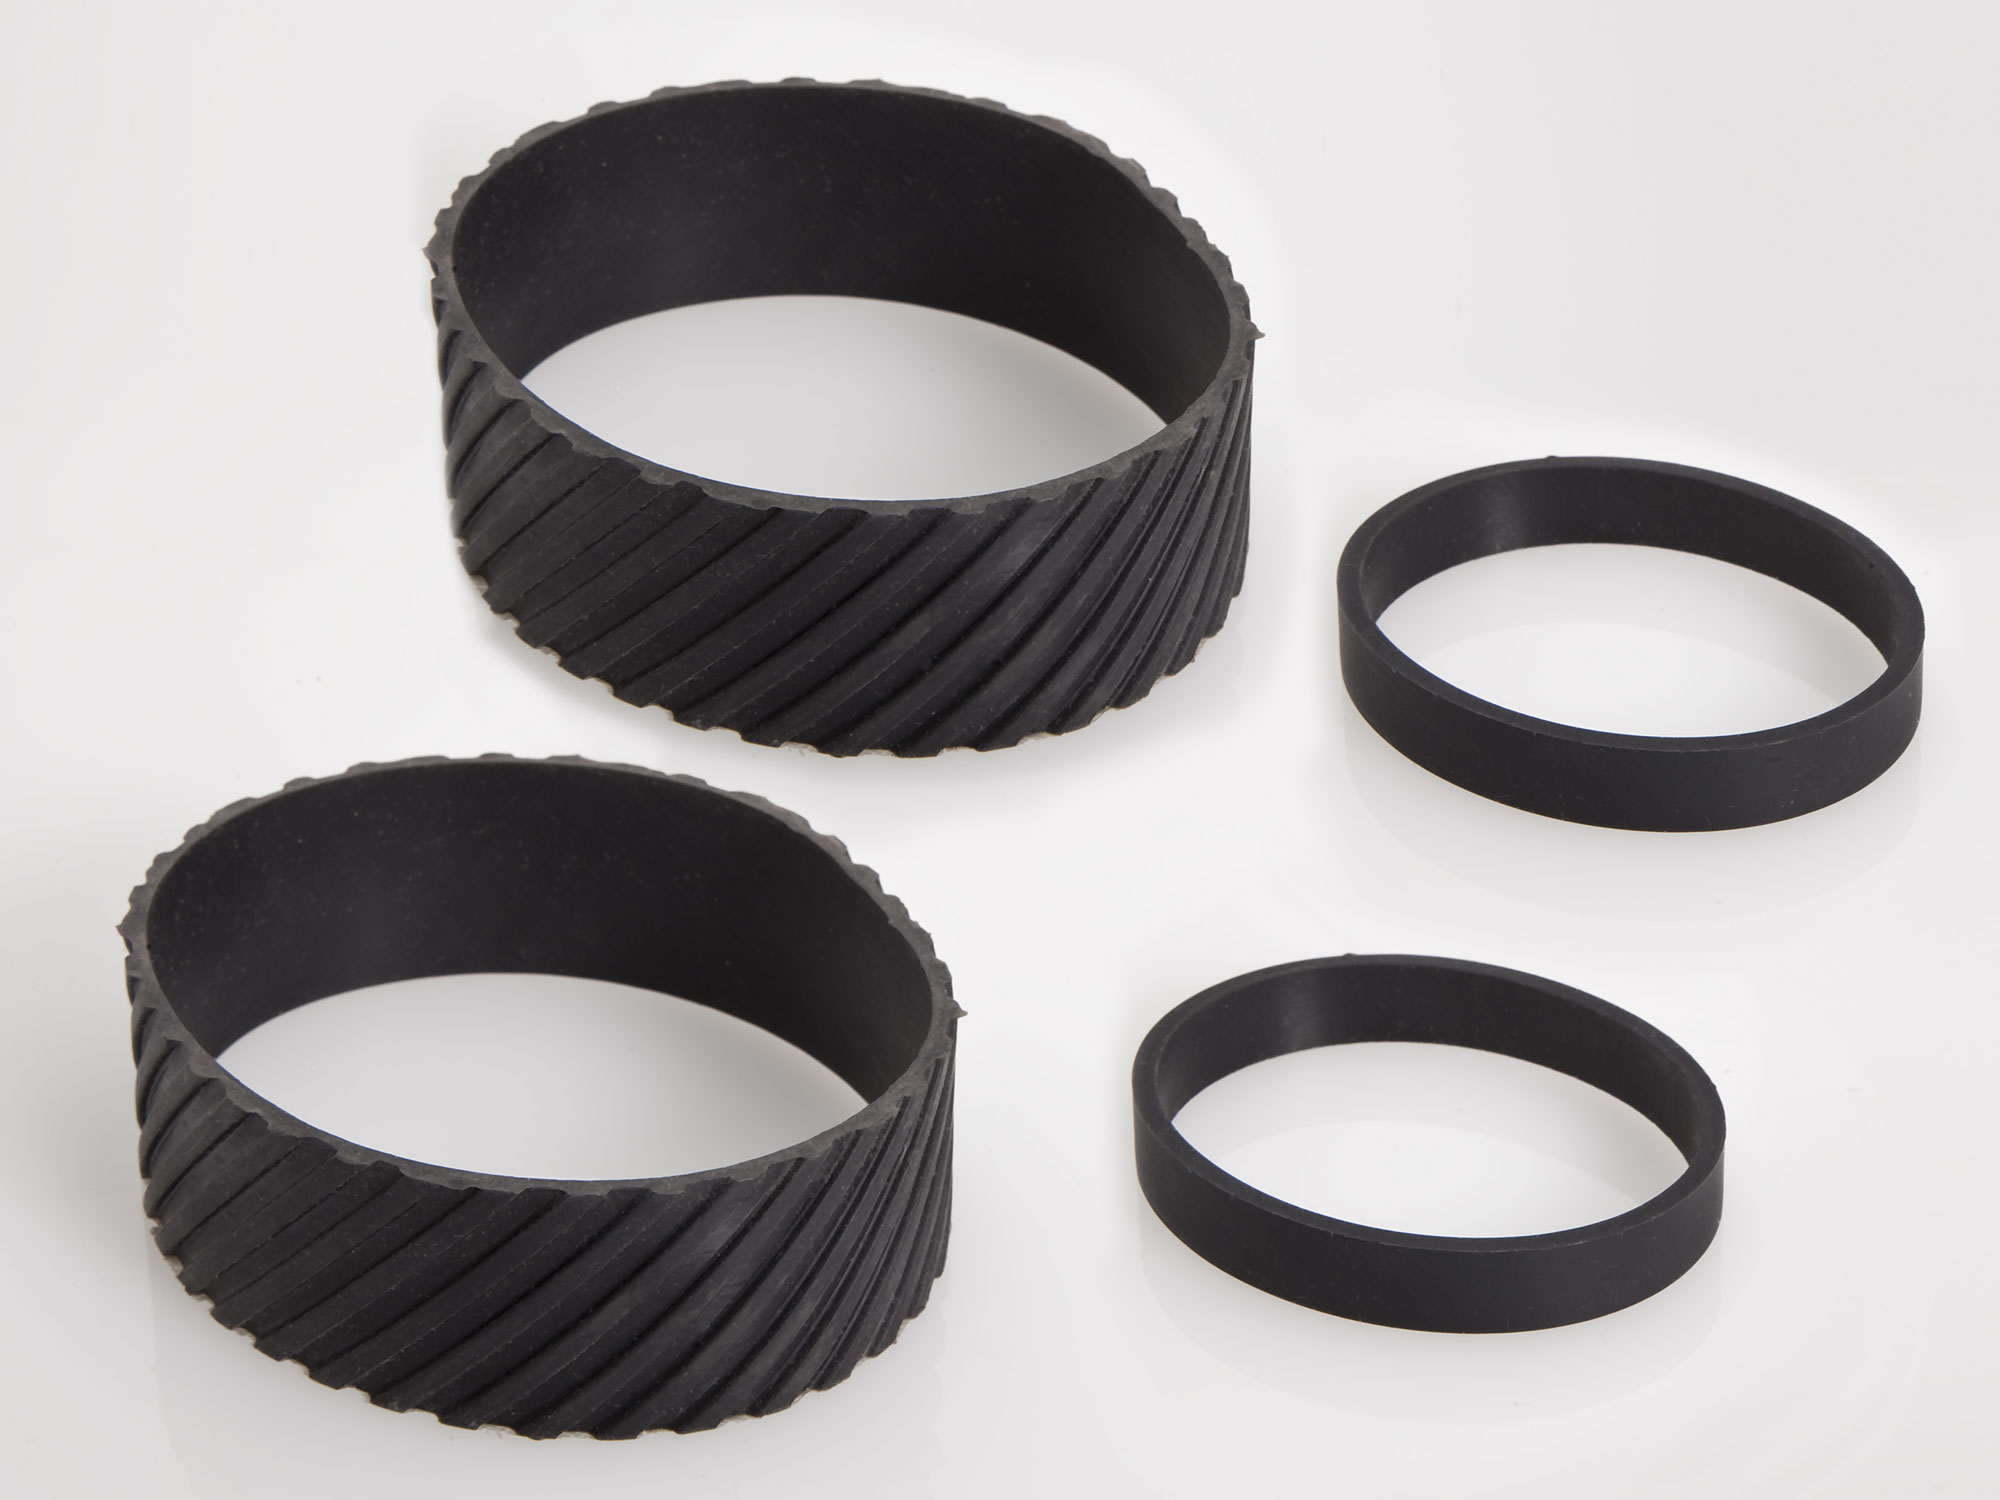 Set of Rubber Tires for Steam Rollers (4pcs)